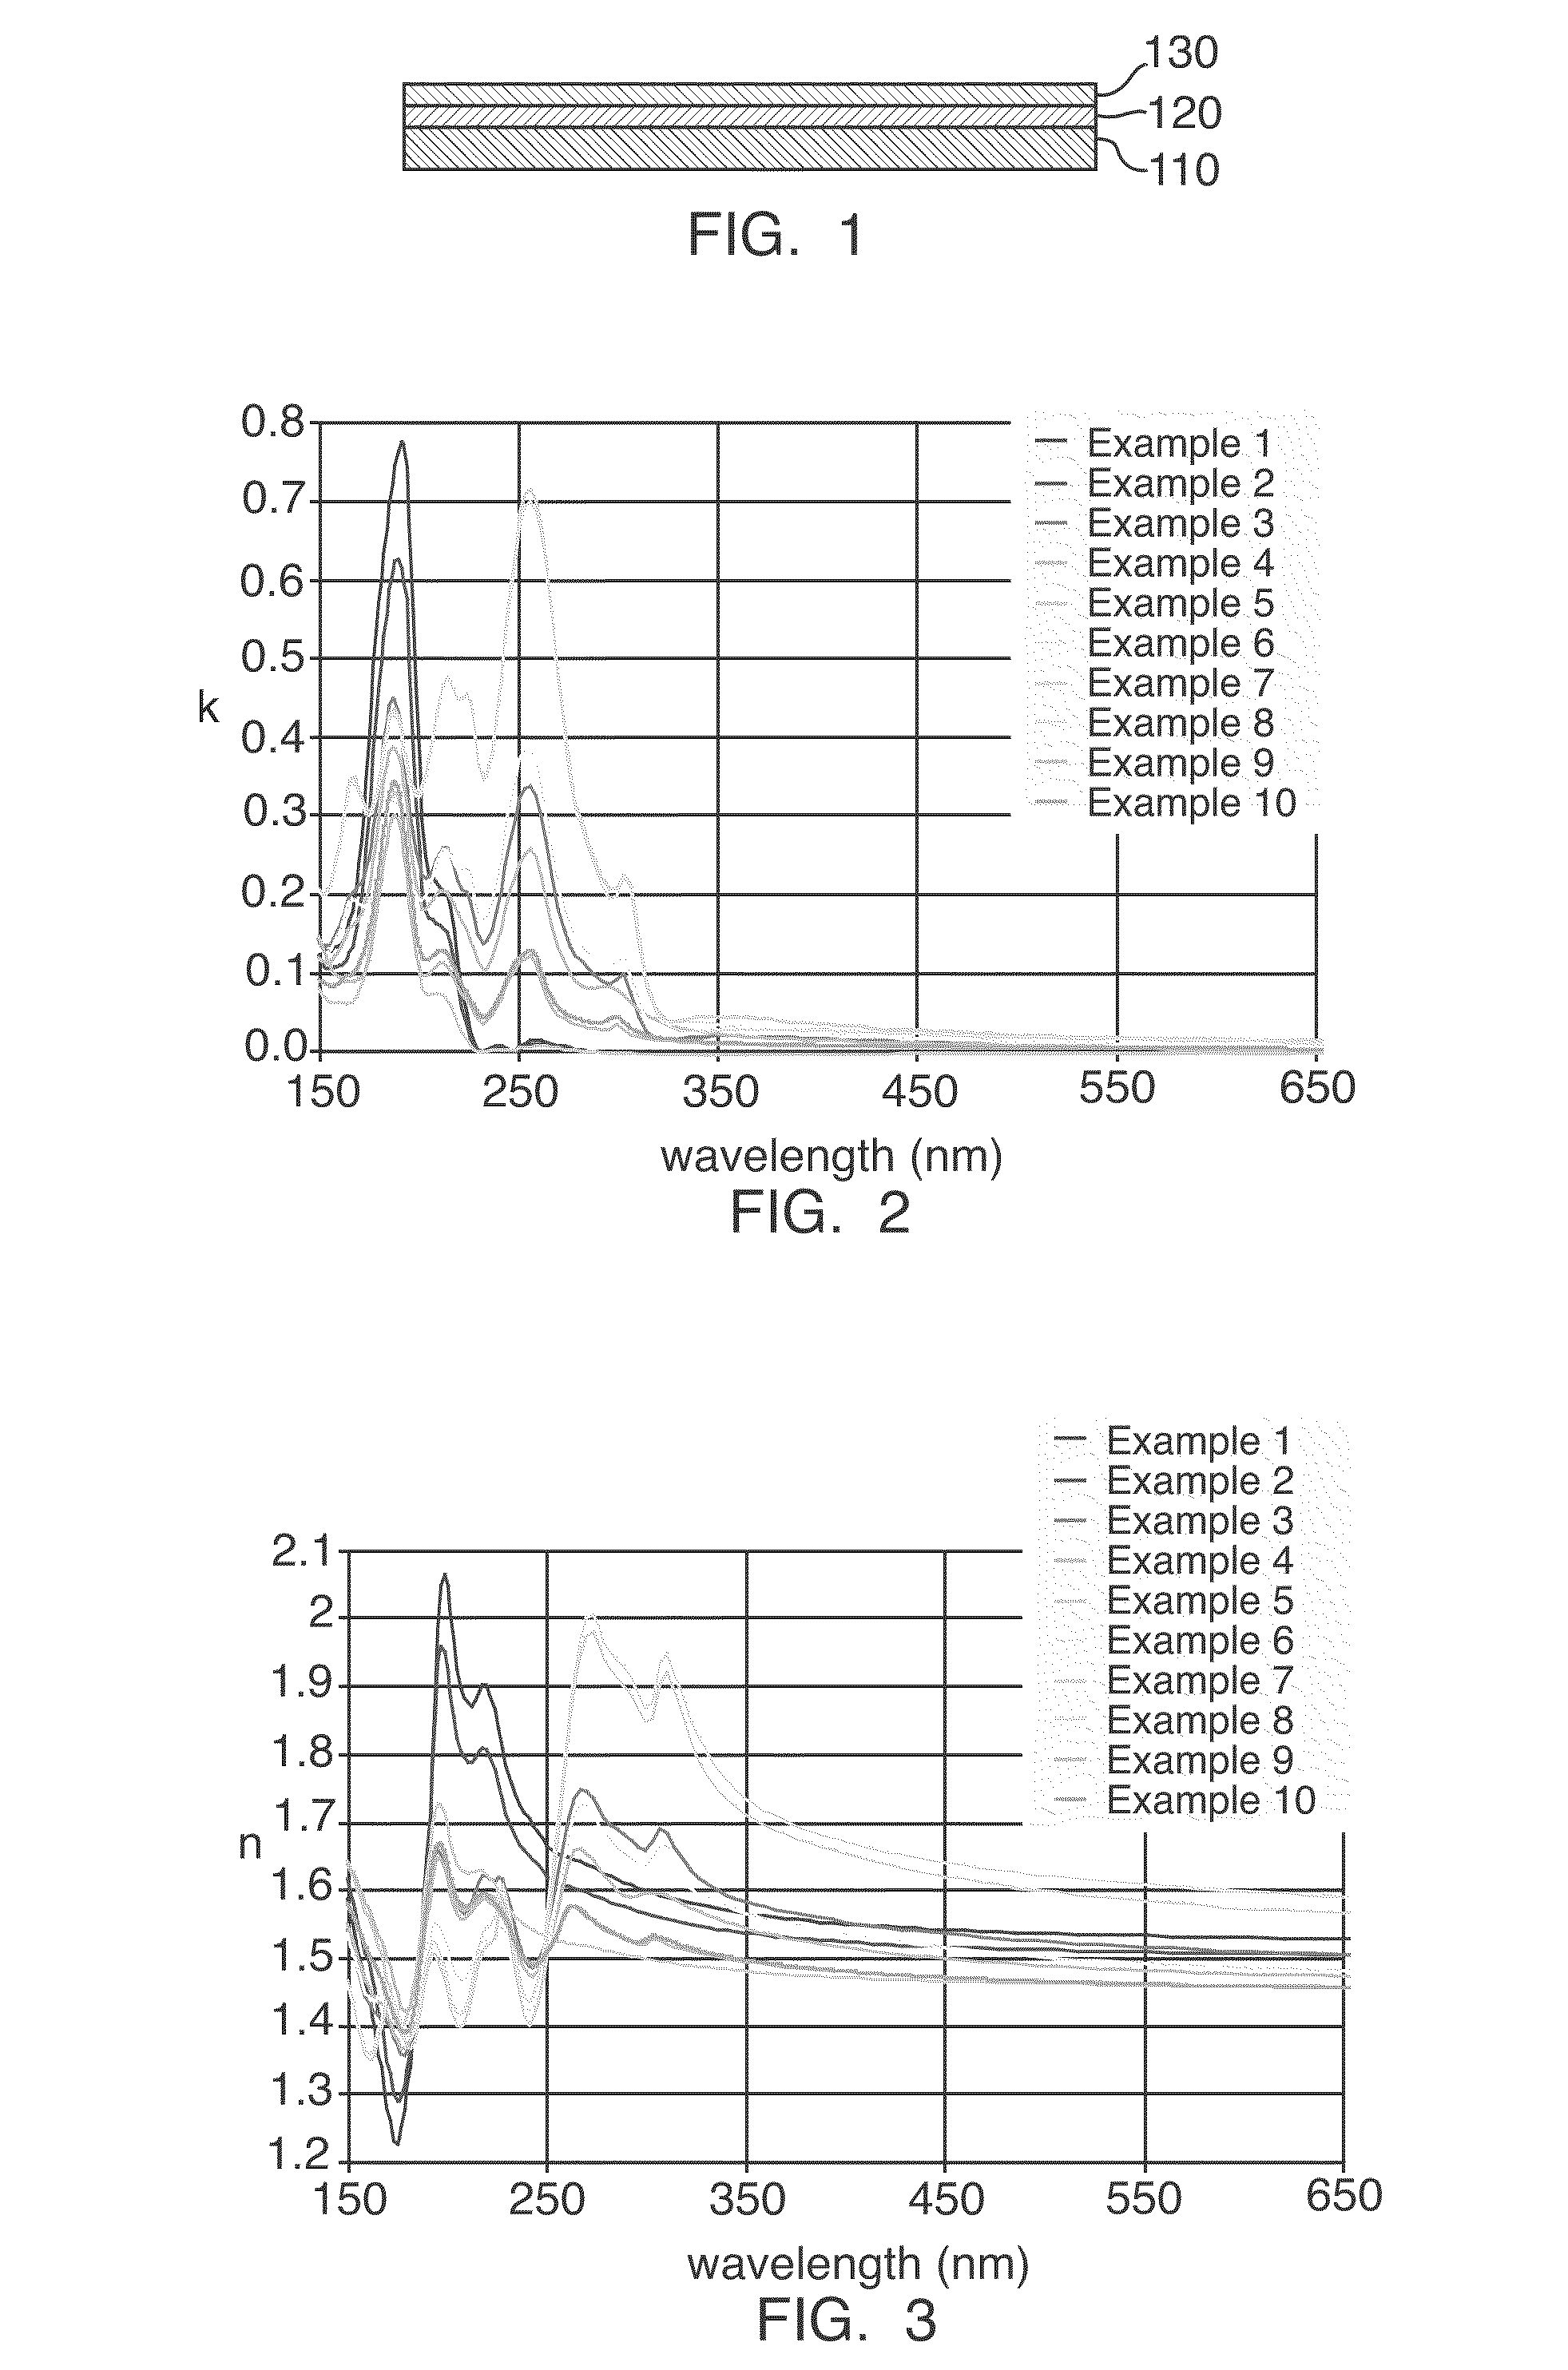 Hybrid inorganic-organic polymer compositions for Anti-reflective coatings